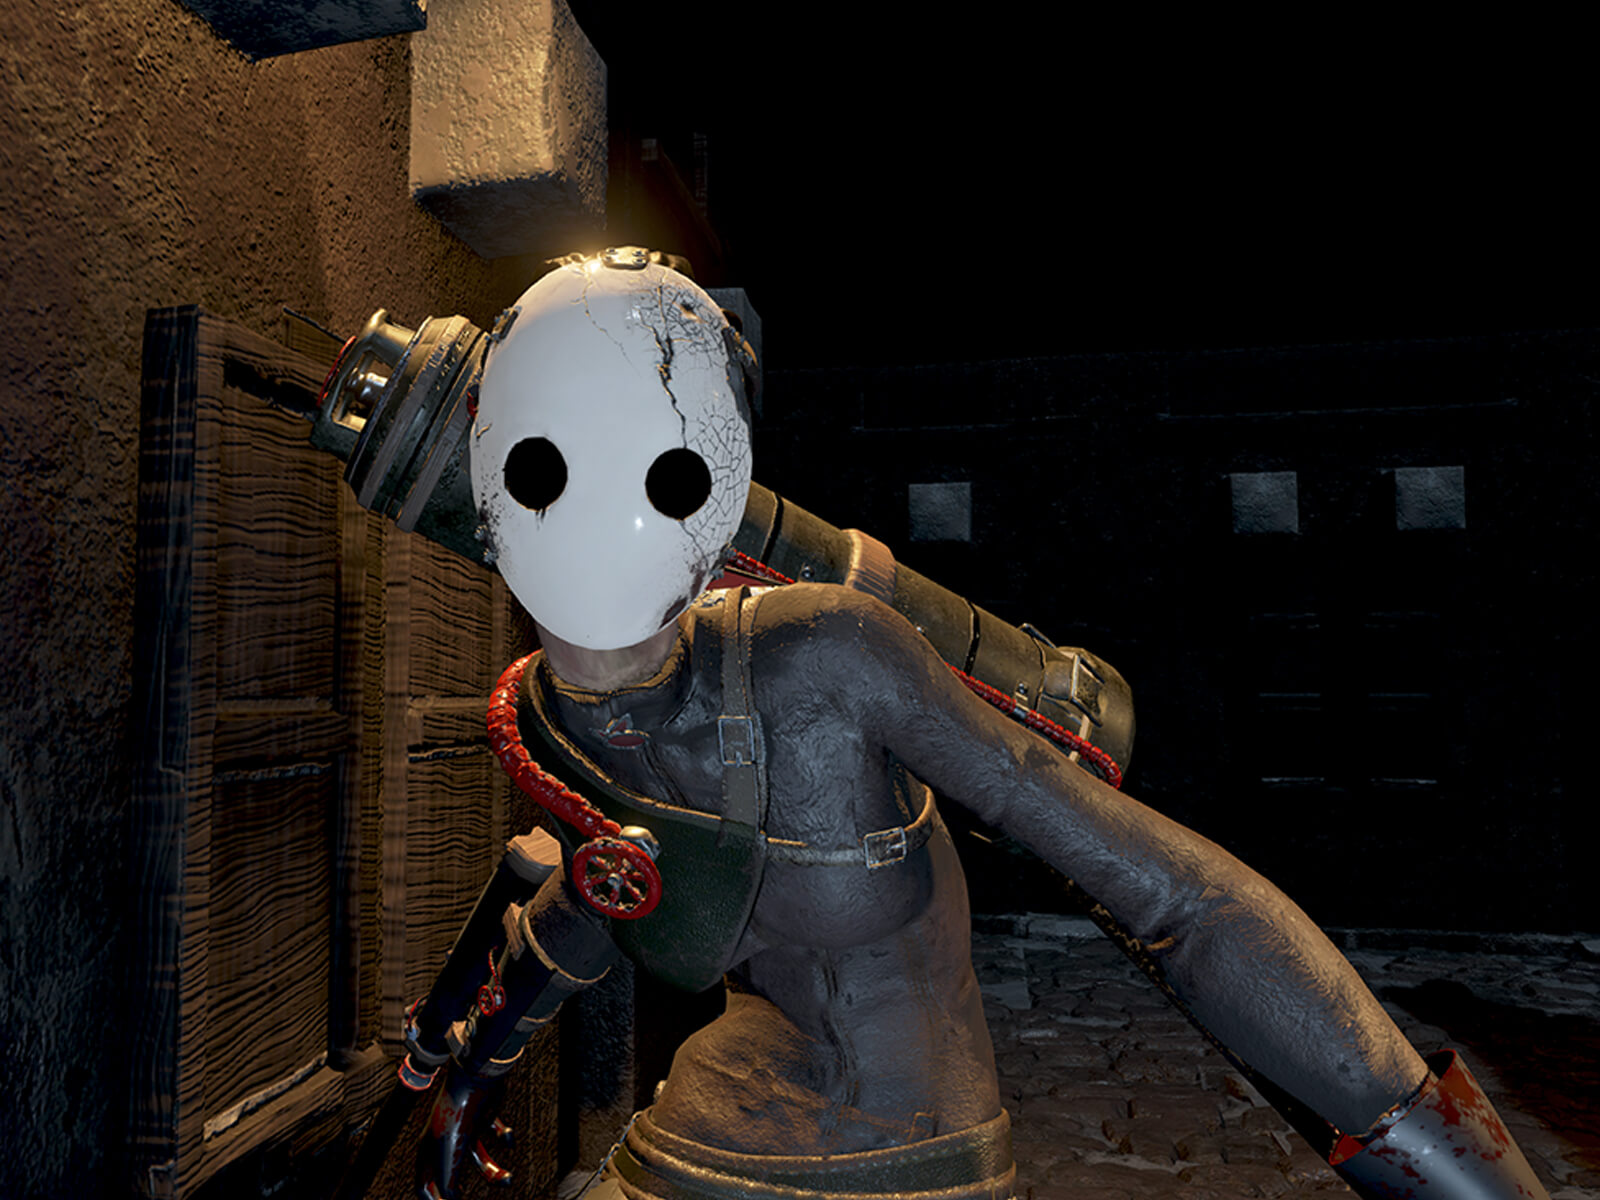 computer-generated 3D environment featuring a character with a shiny, egg-like mask in a dark alley